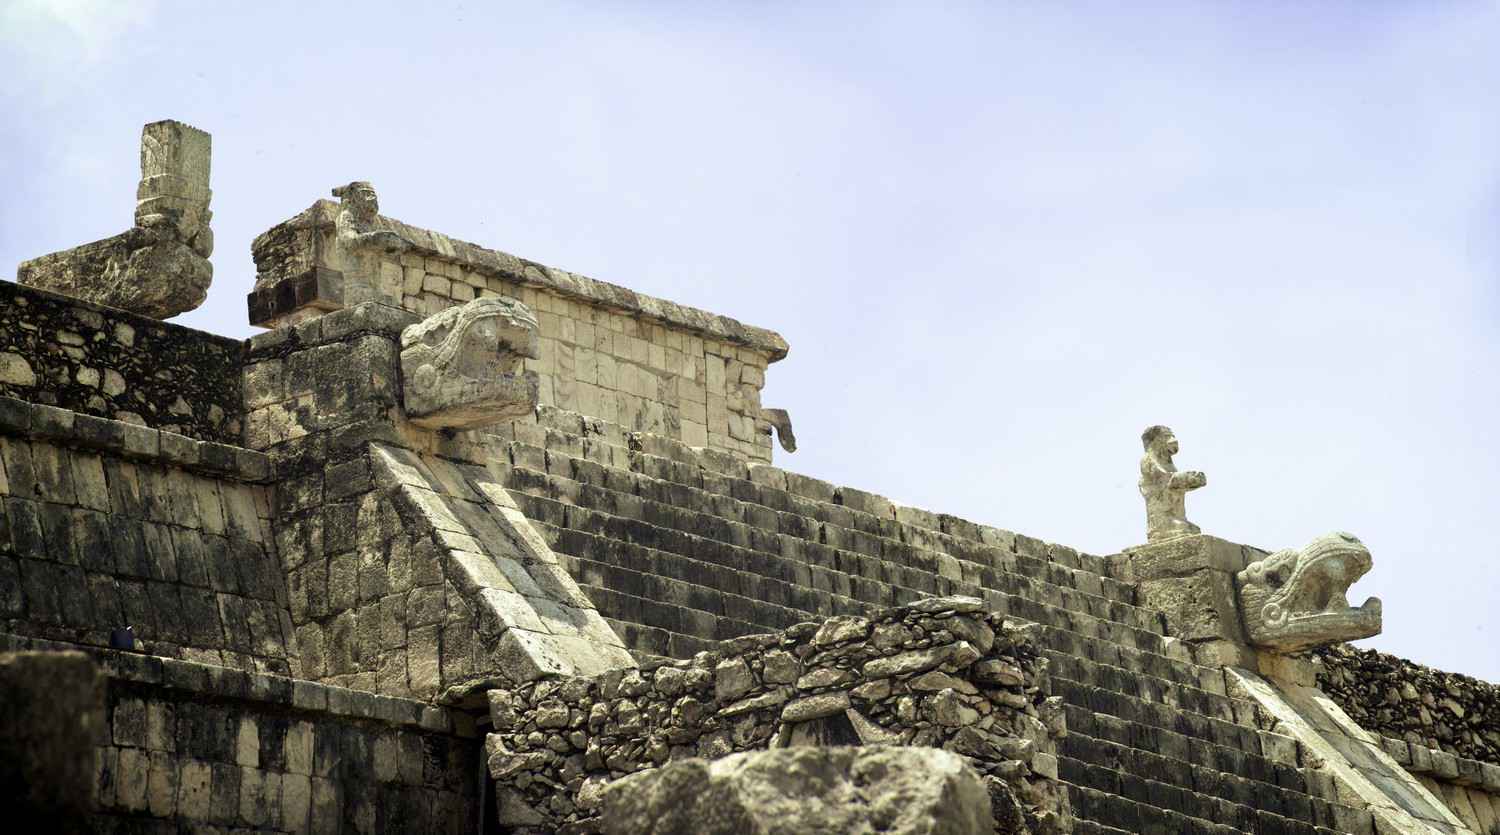 Statues of both a lizard and a snake on the side of a Mayan pyramid.